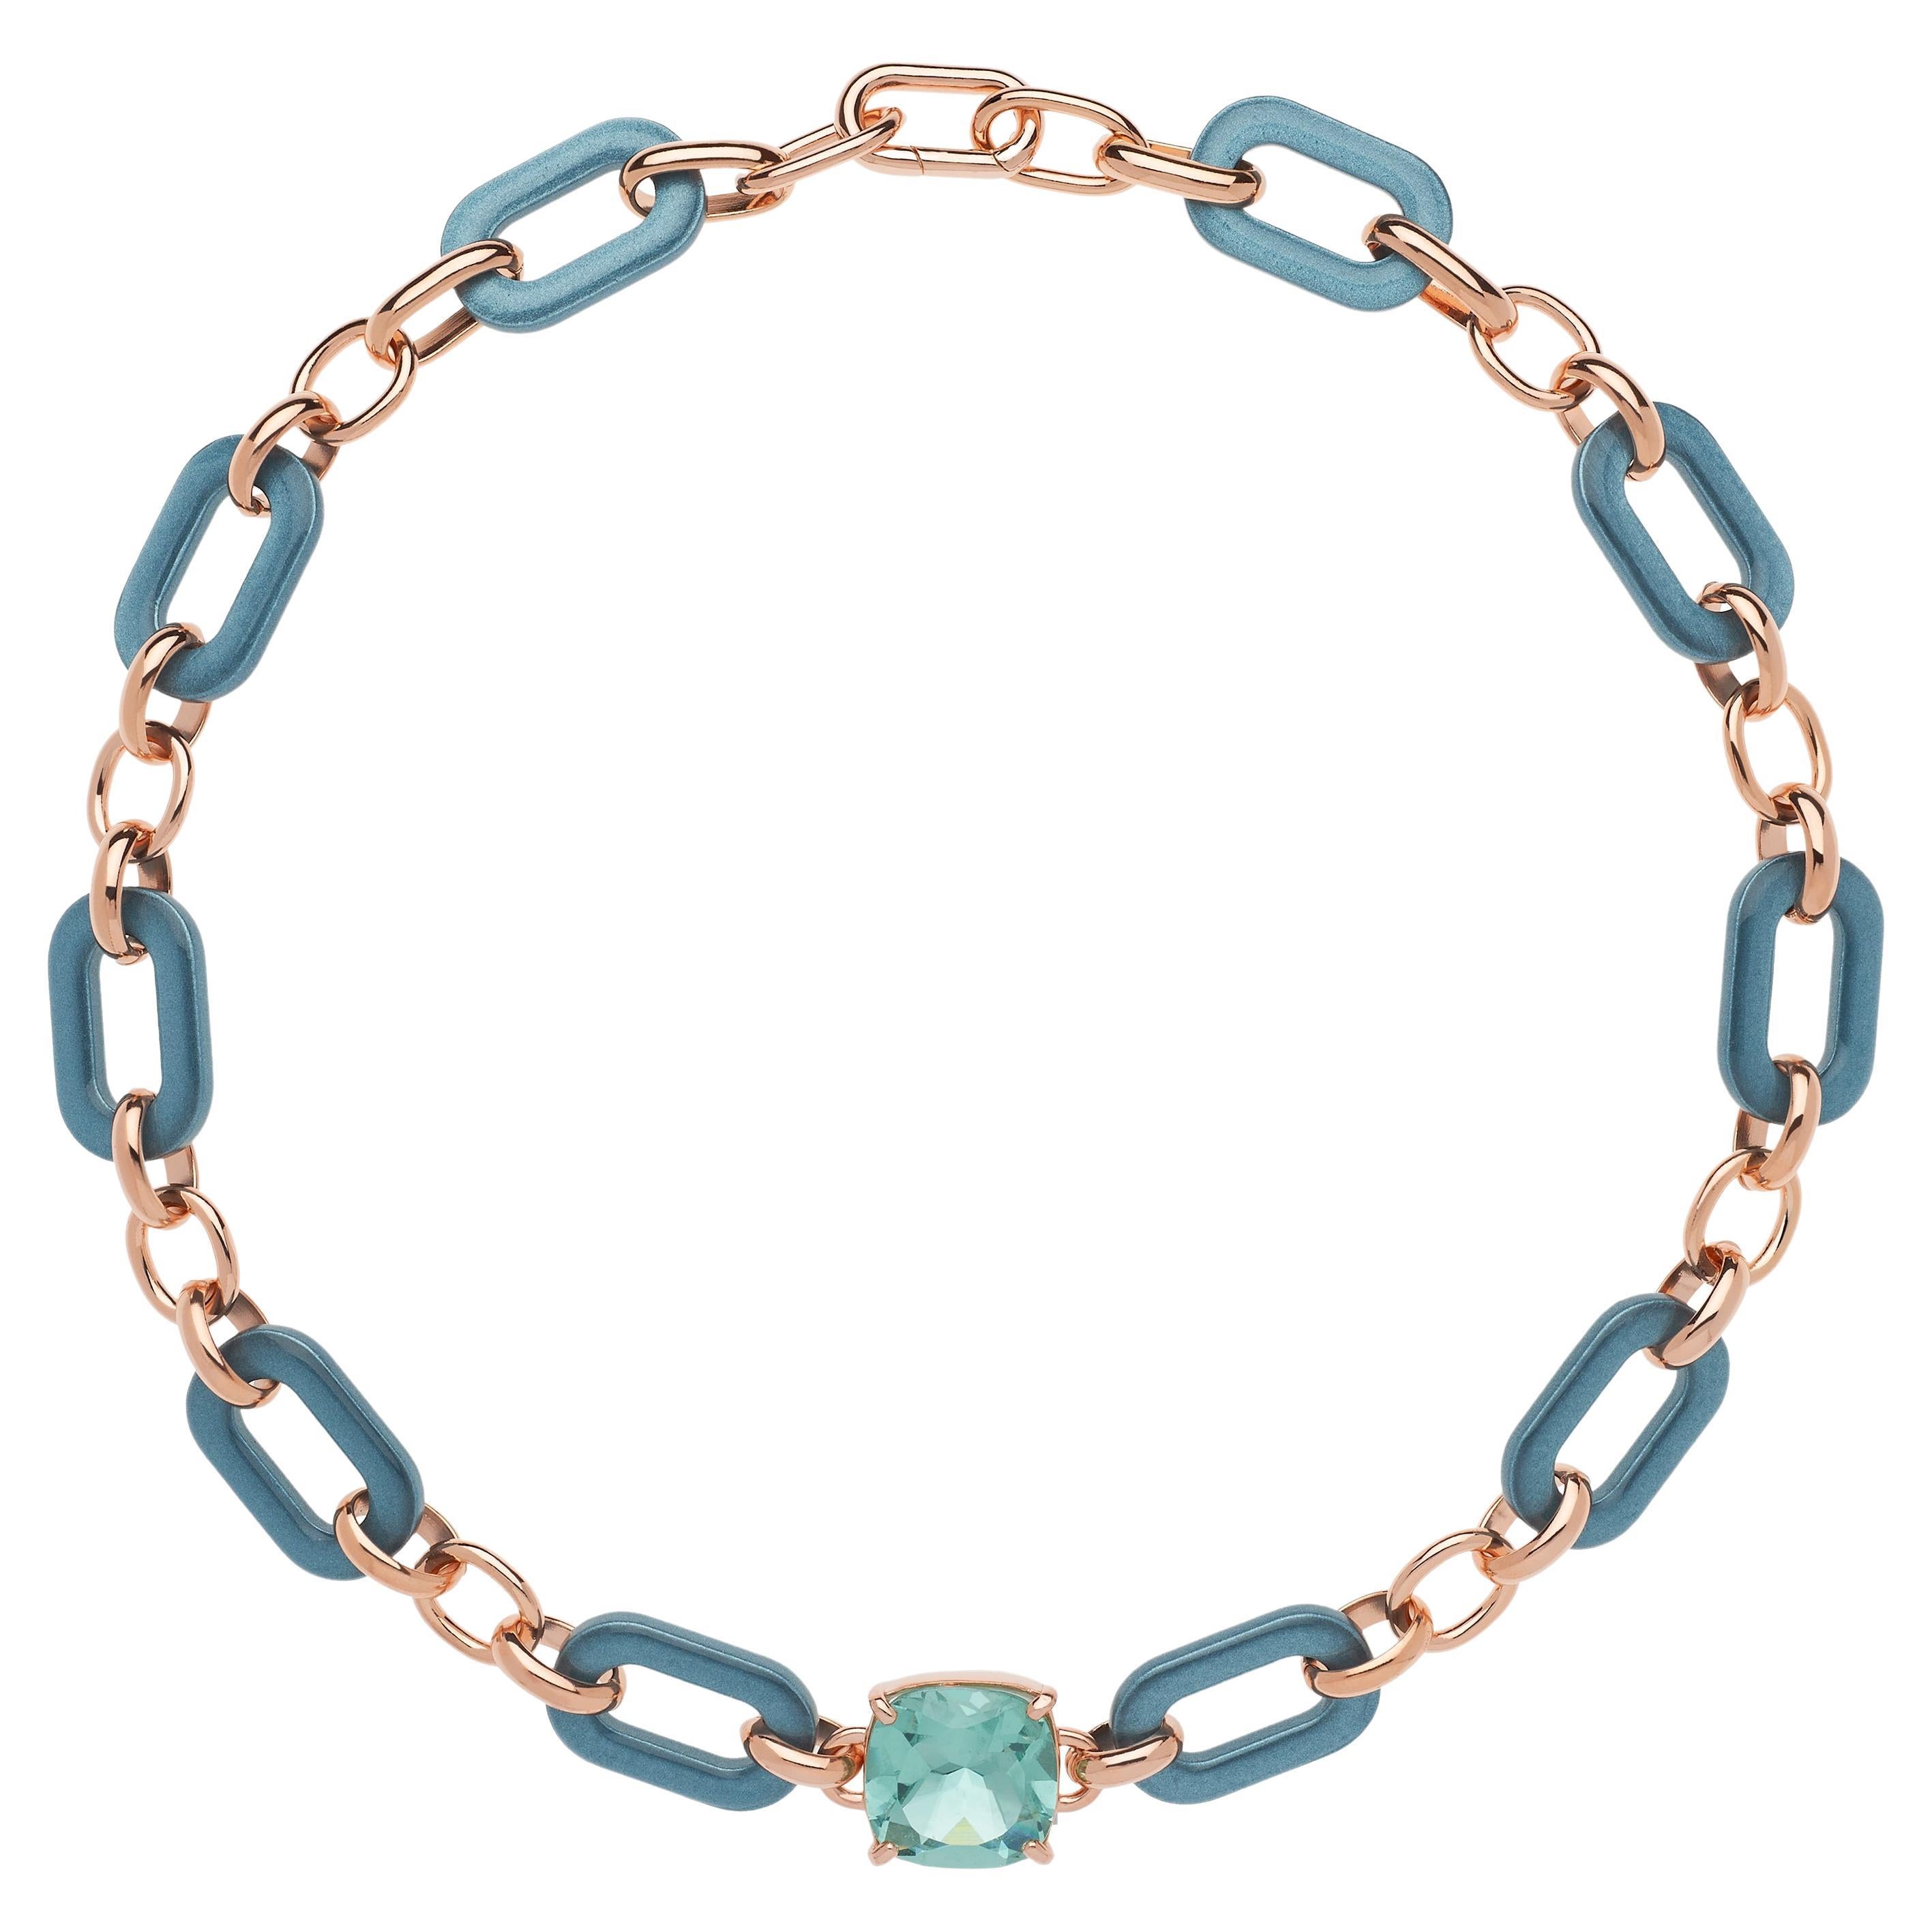 Rossoprezioso Chain Choker in Lacquered and Enameled Wood + Quartz Cushion Cut